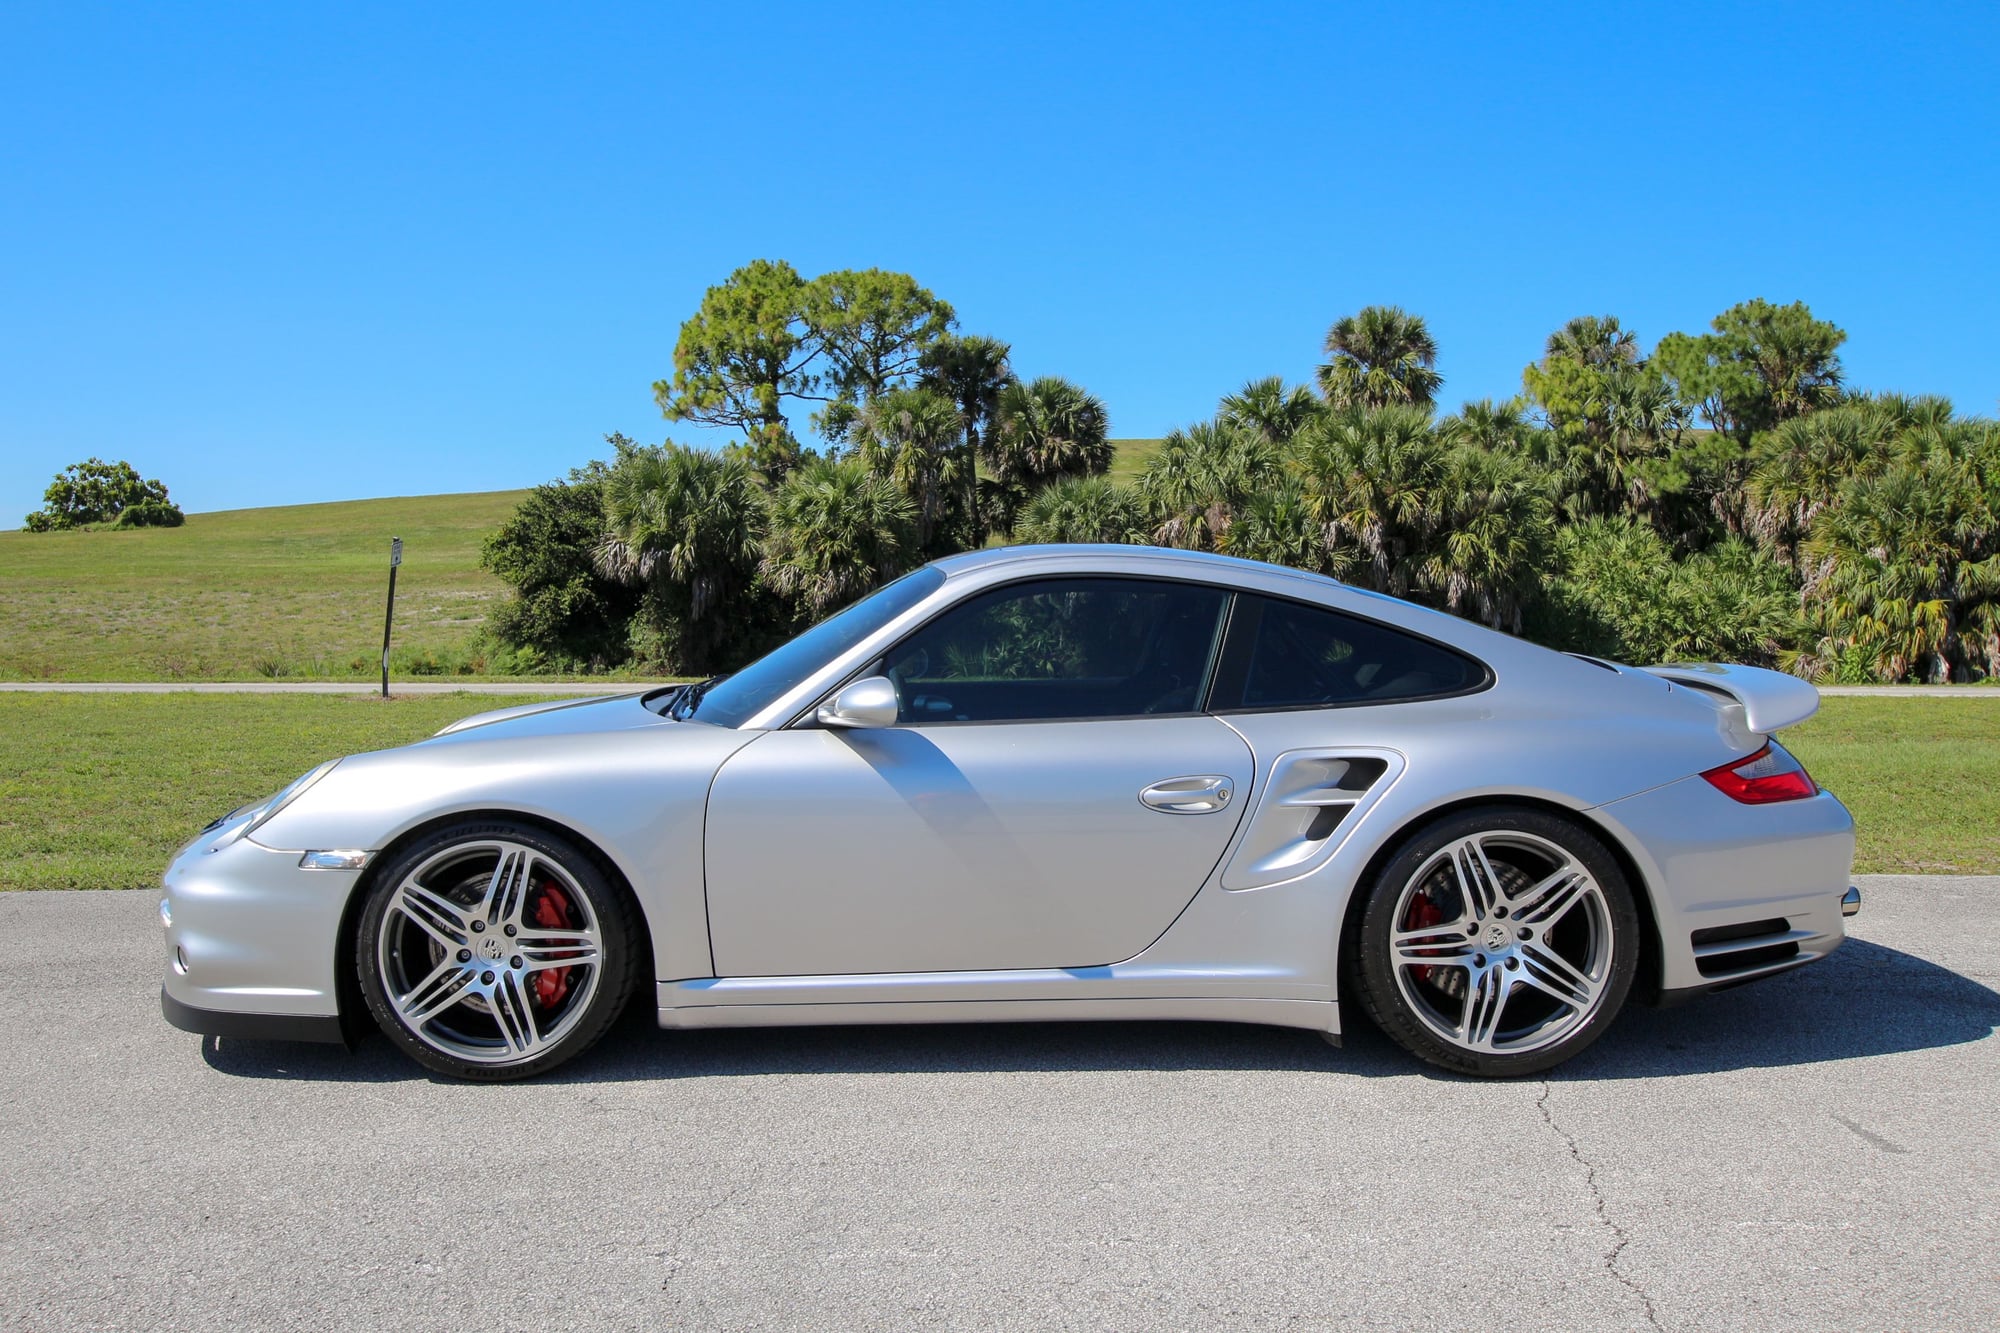 2007 Porsche 911 - 2007 Porsche 911 Turbo 6-Speed w/ Switzer Performance P700 - Used - VIN WP0AD29947S783912 - 72,527 Miles - 6 cyl - AWD - Manual - Coupe - Silver - Riviera Beach, FL 33407, United States